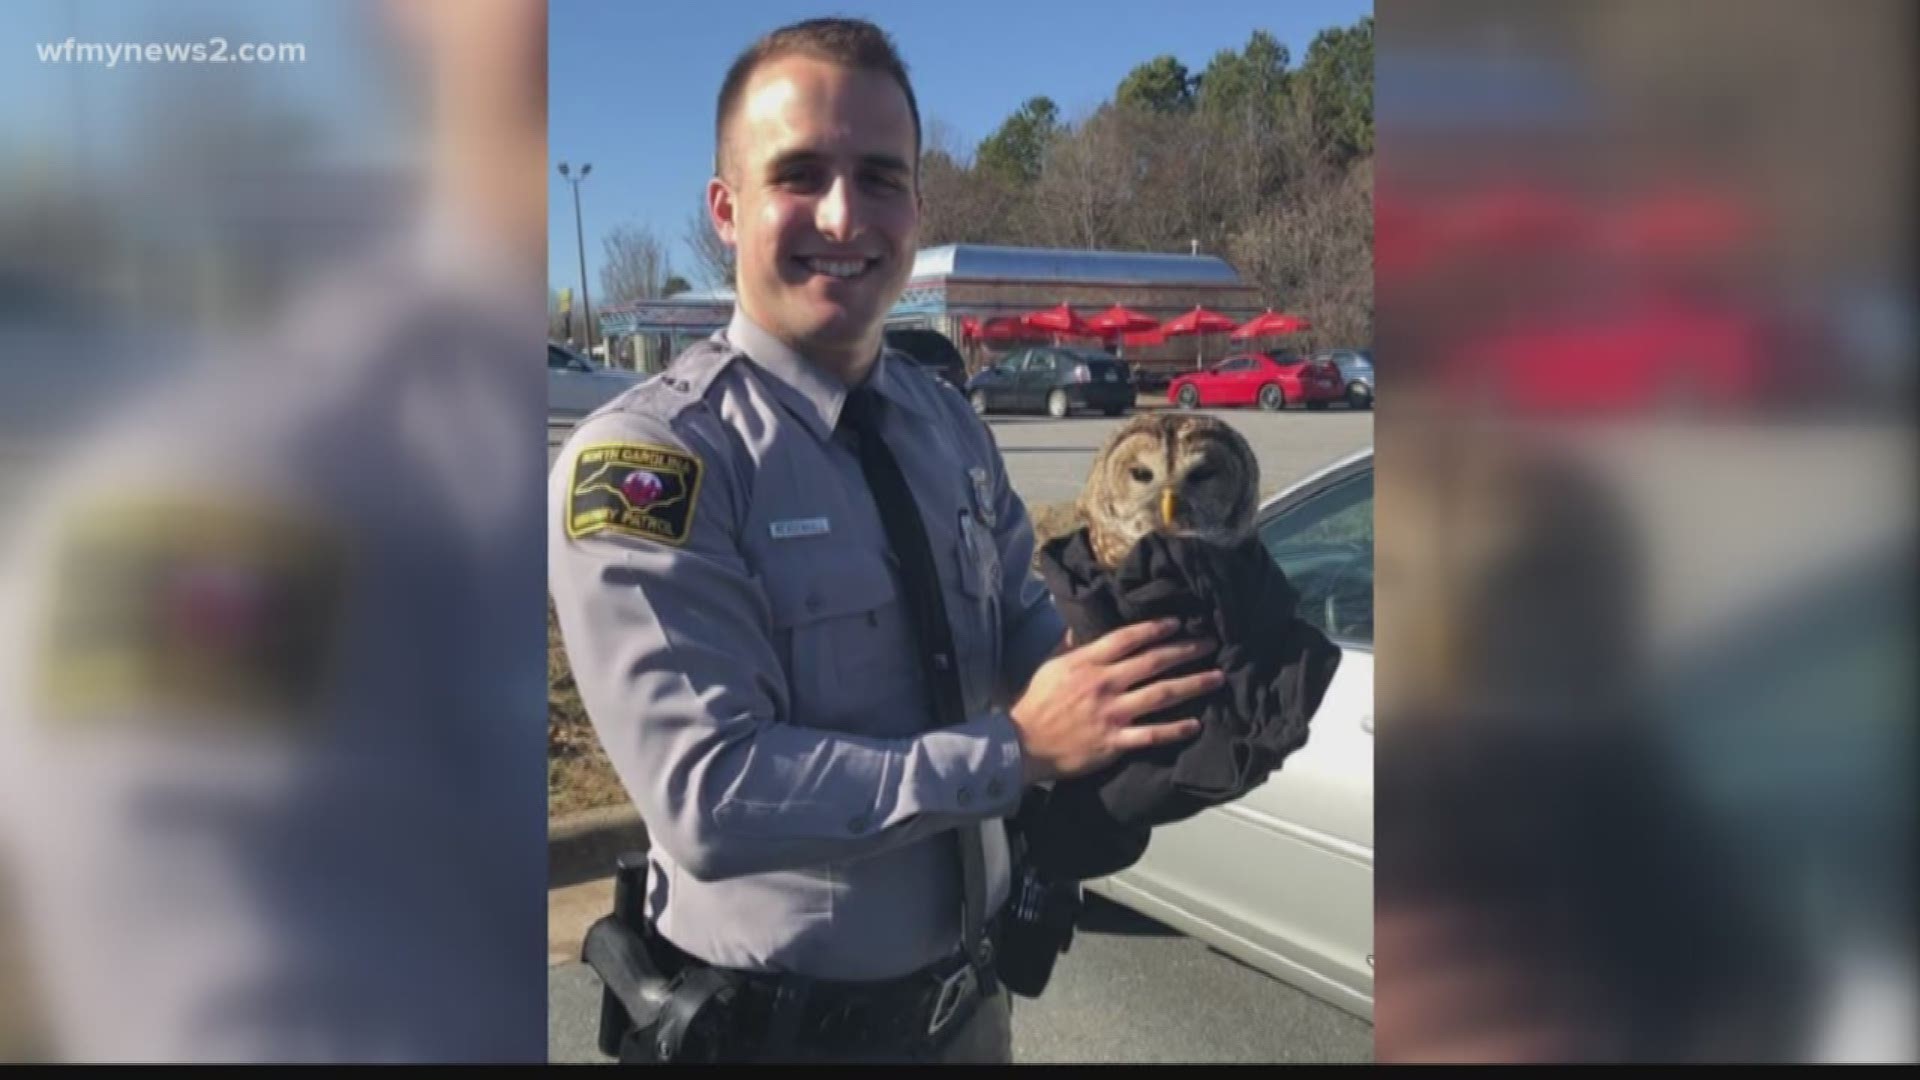 An owl with a broken wing rescued from a median near the Union Cross Road exit in Kernersville is recovering after surgery.